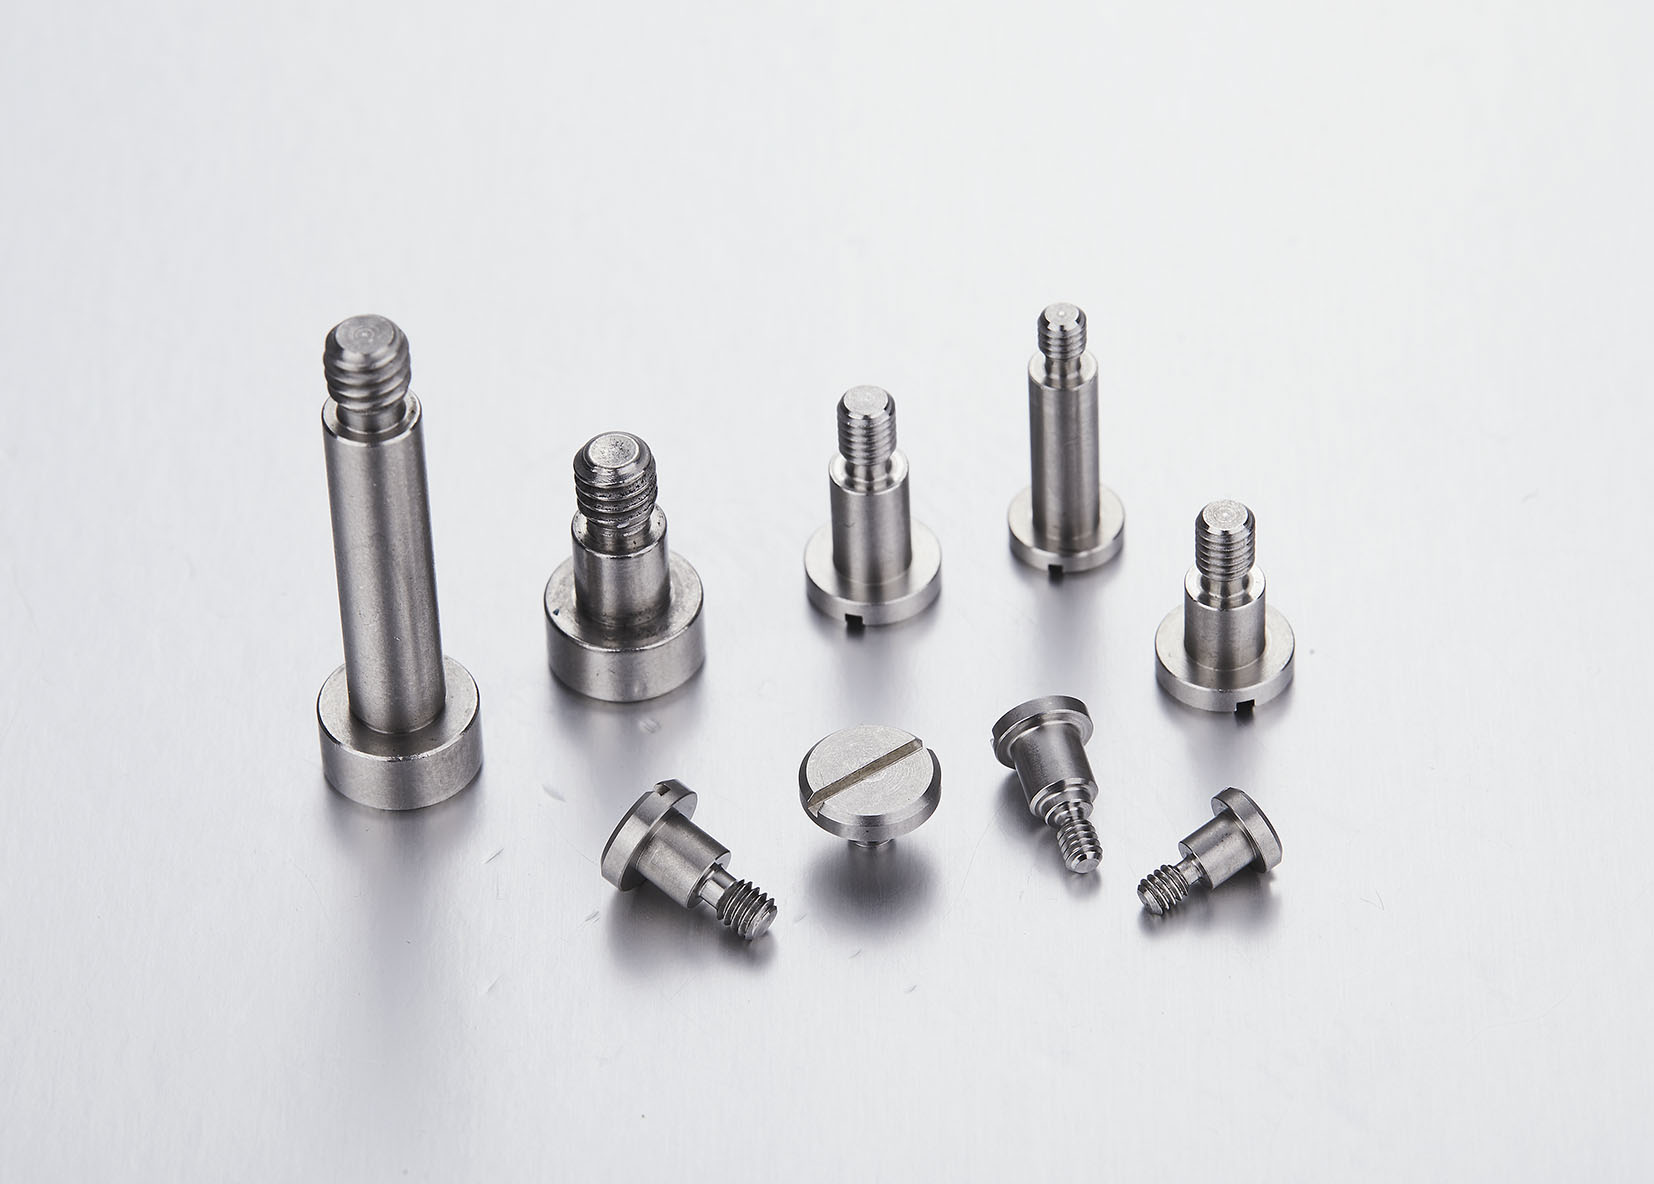 What factors determine the tensile strength and load capacity of stainless steel shoulder bolts?